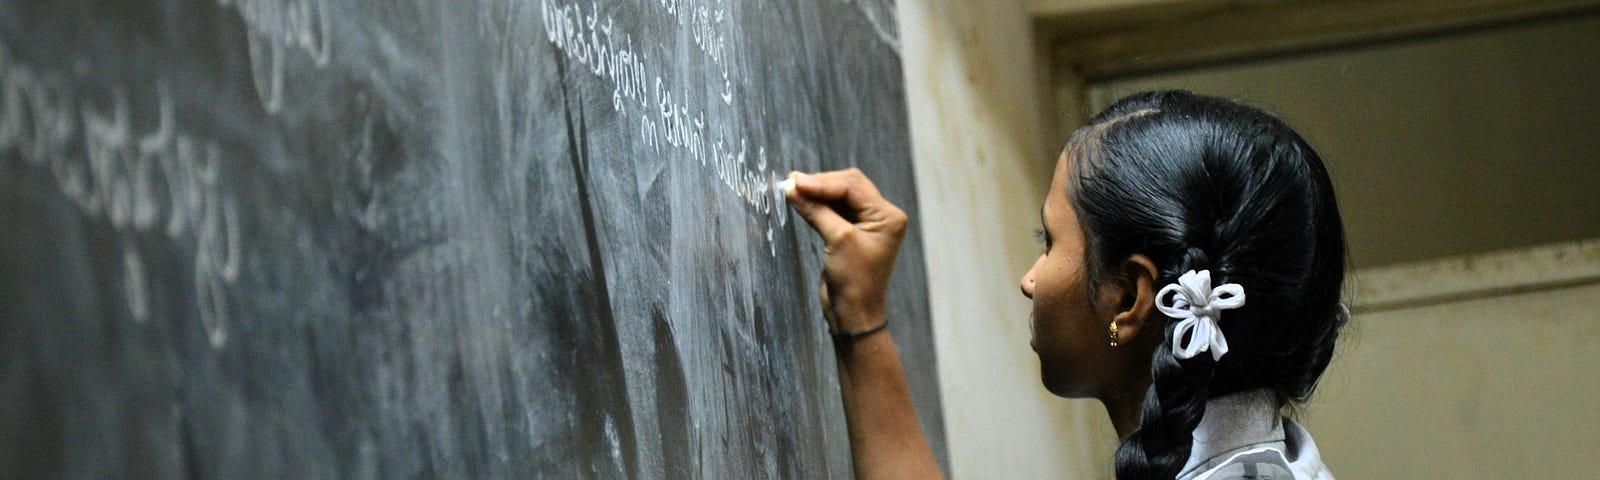 A young girl is writing on the blackboard in class.